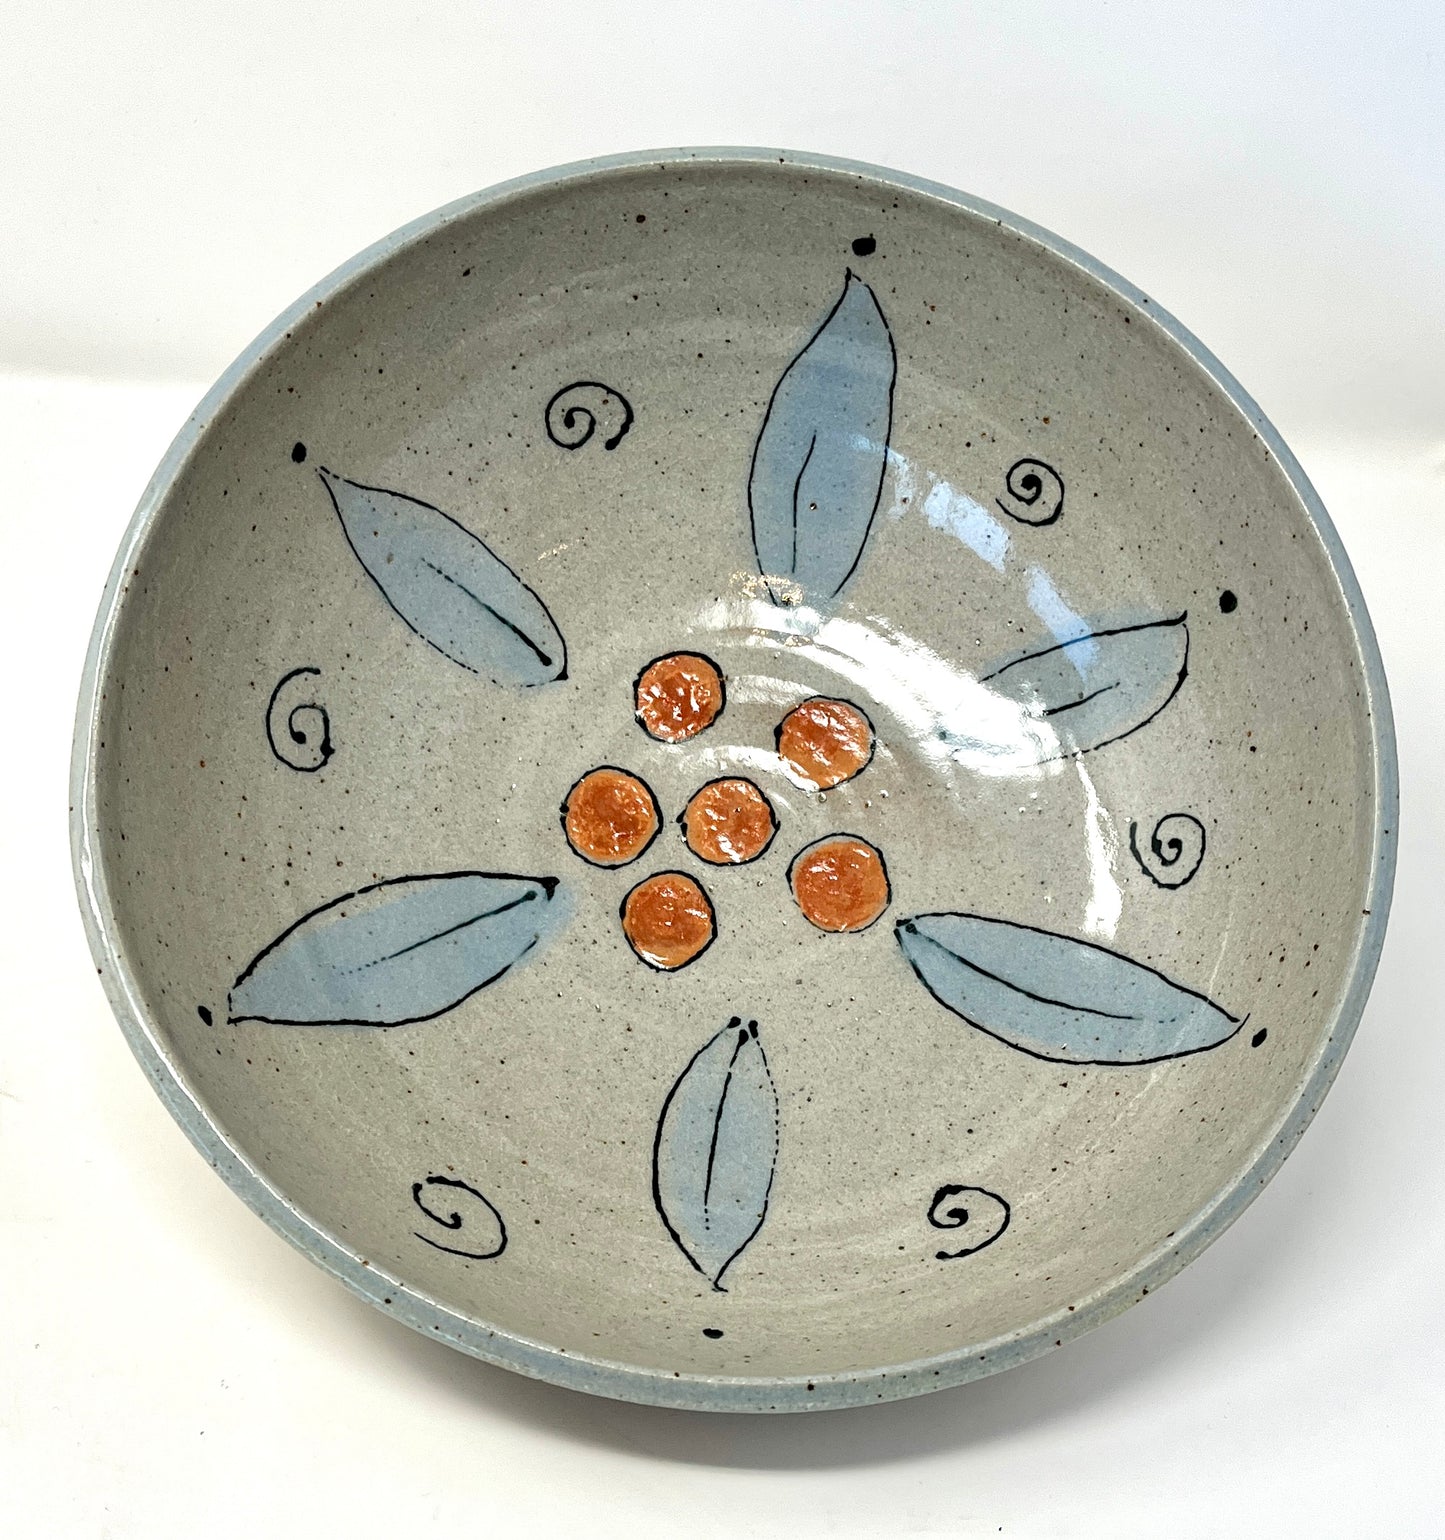 Cate Smith Large Serving Bowl